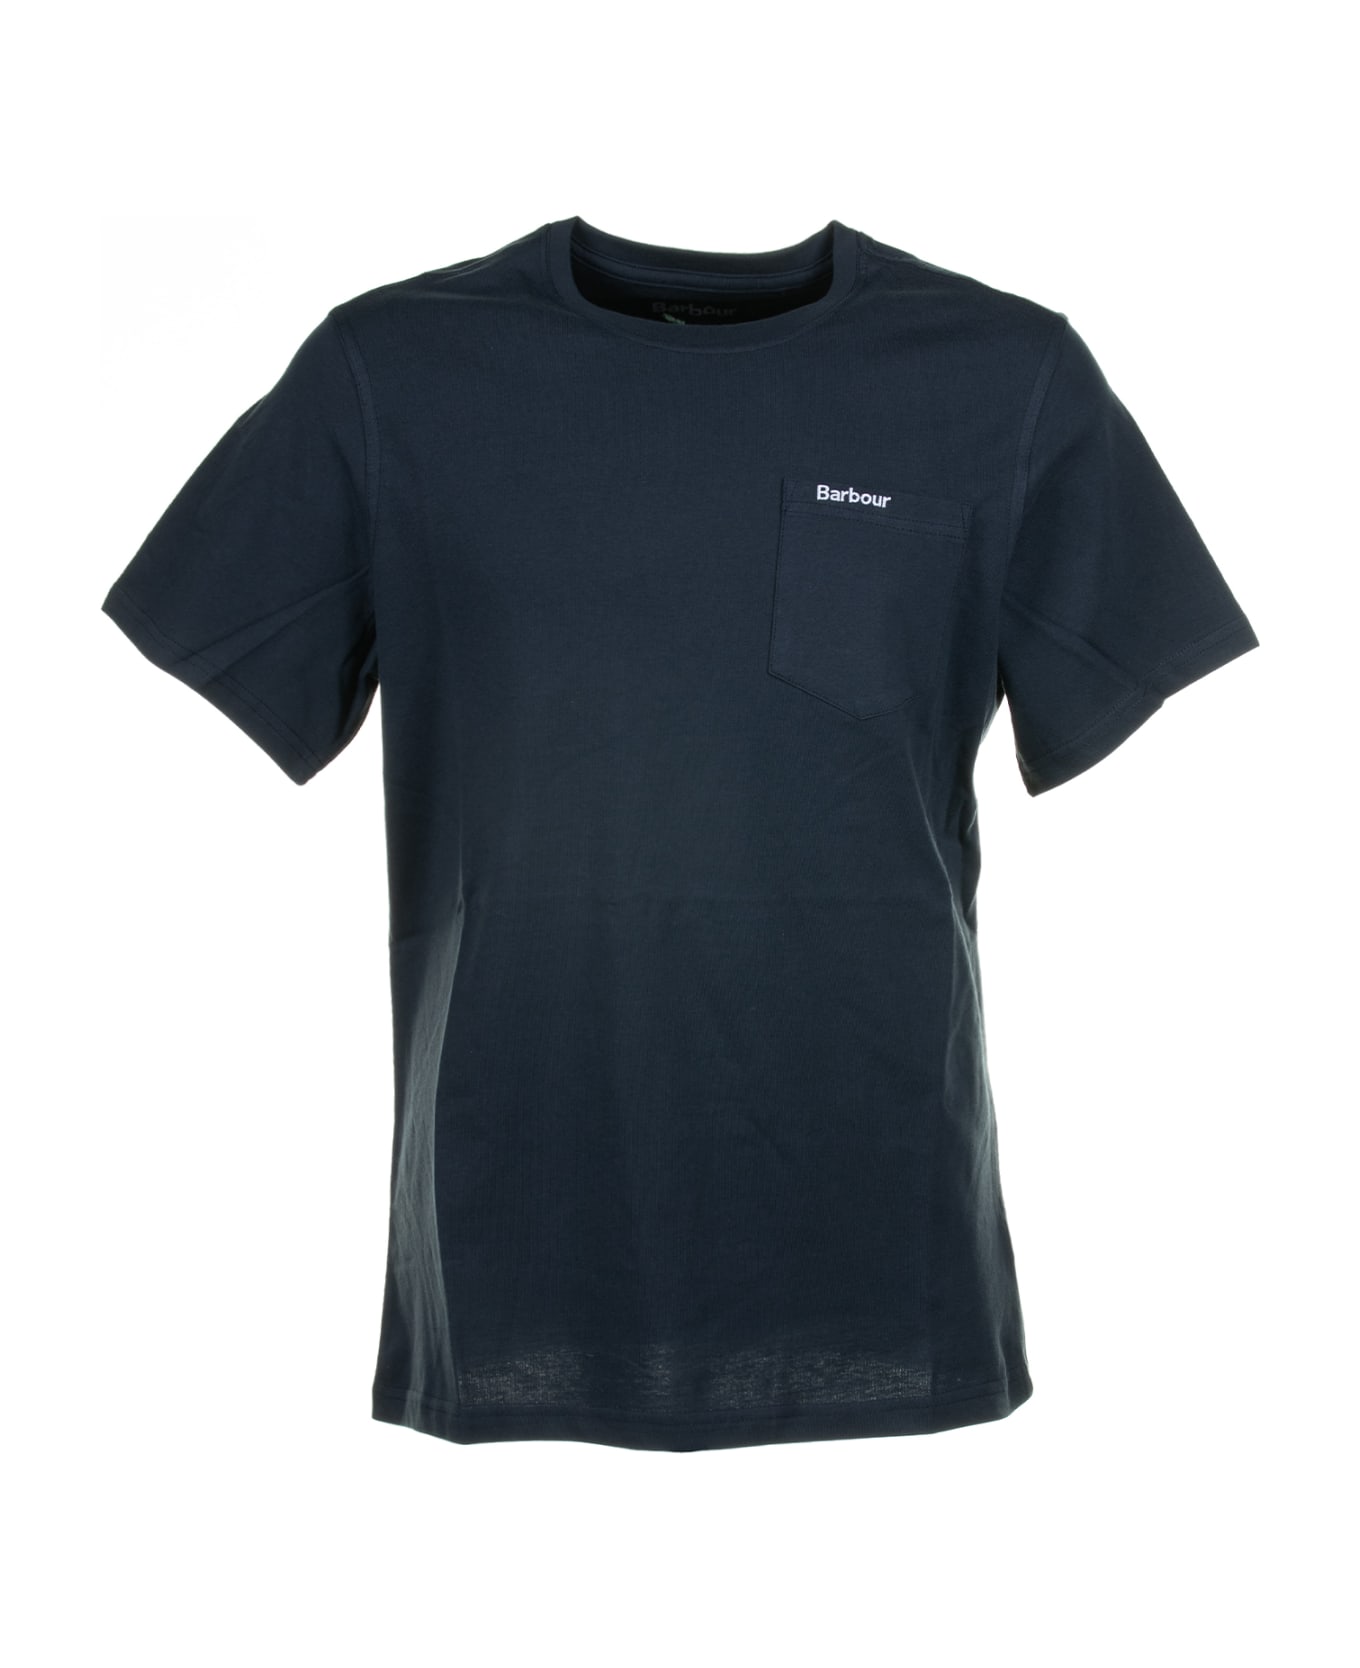 Barbour Navy Blue T-shirt With Pocket And Logo - NAVY シャツ